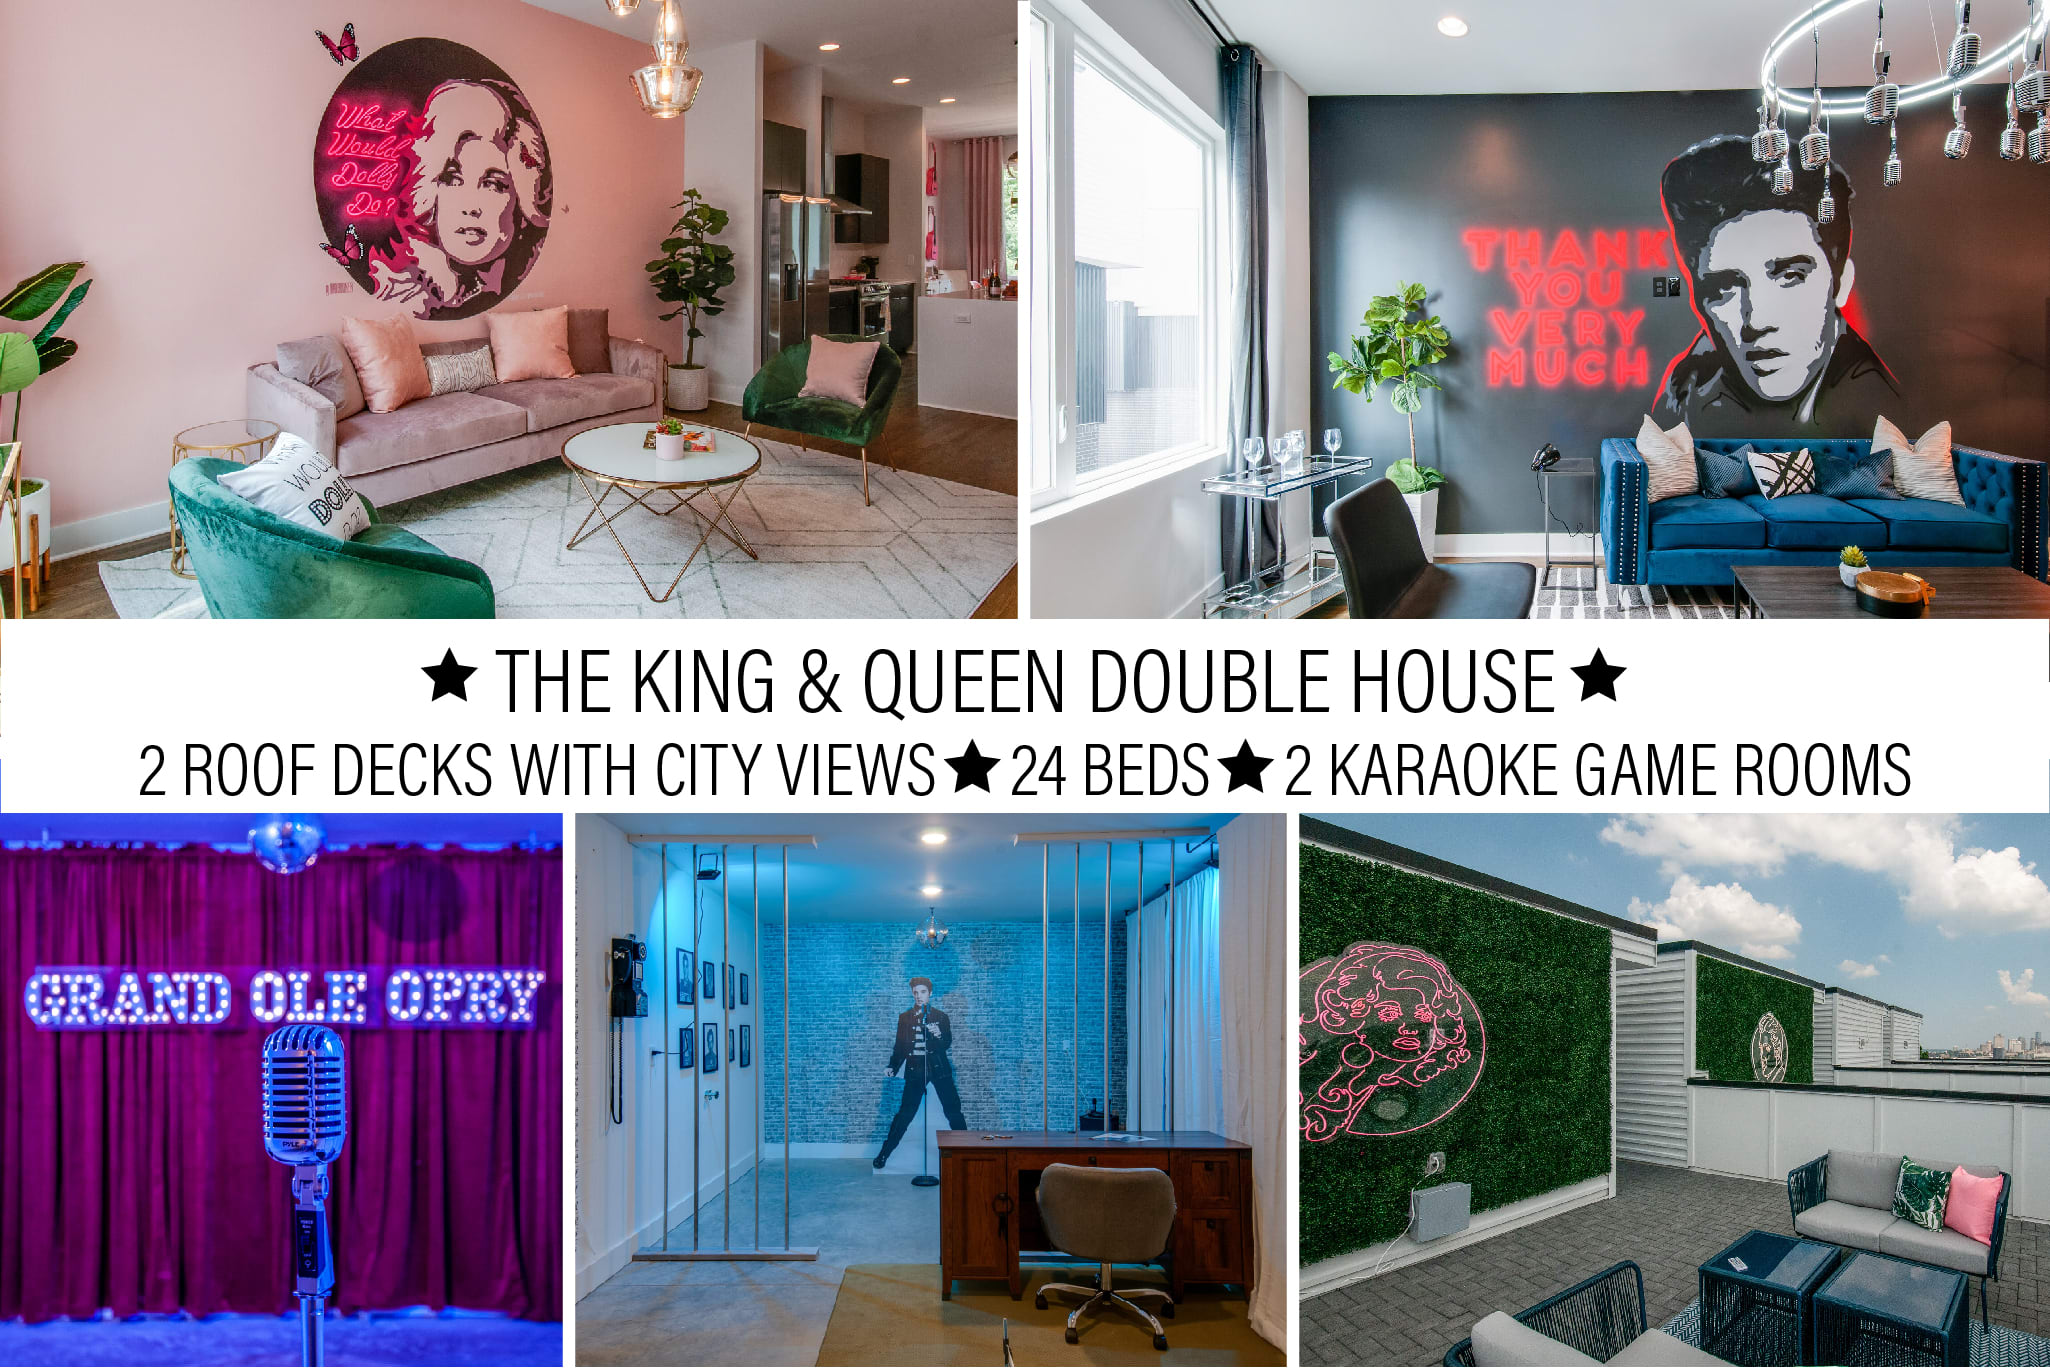 Property Image 1 - KING & QUEEN DOUBLE★2 HOMES★ 24 BEDS! ★ CITY VIEWS